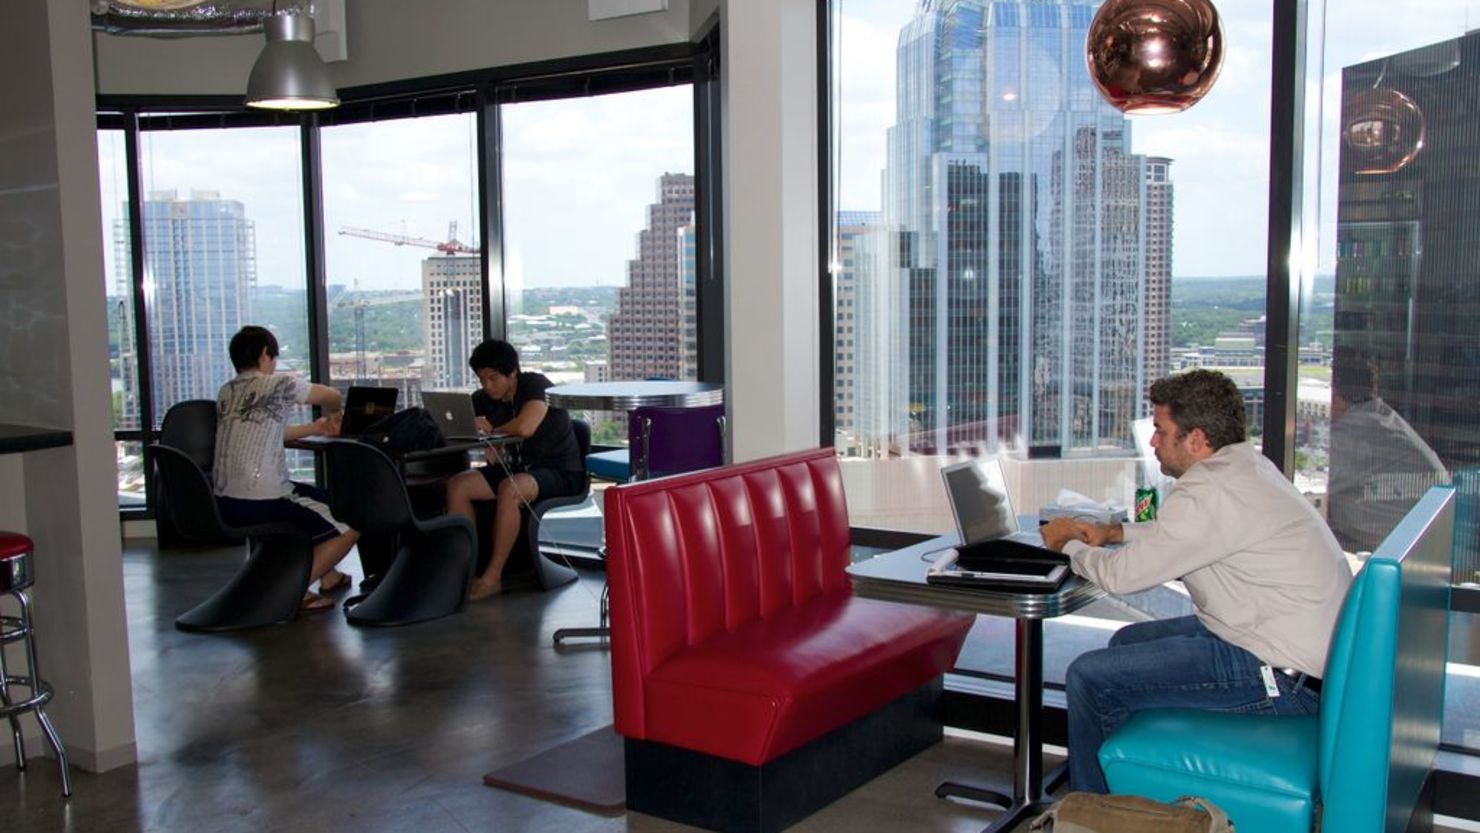 With the city's skyline in the background, tech entrepreneurs work at Austin's Capital Factory.